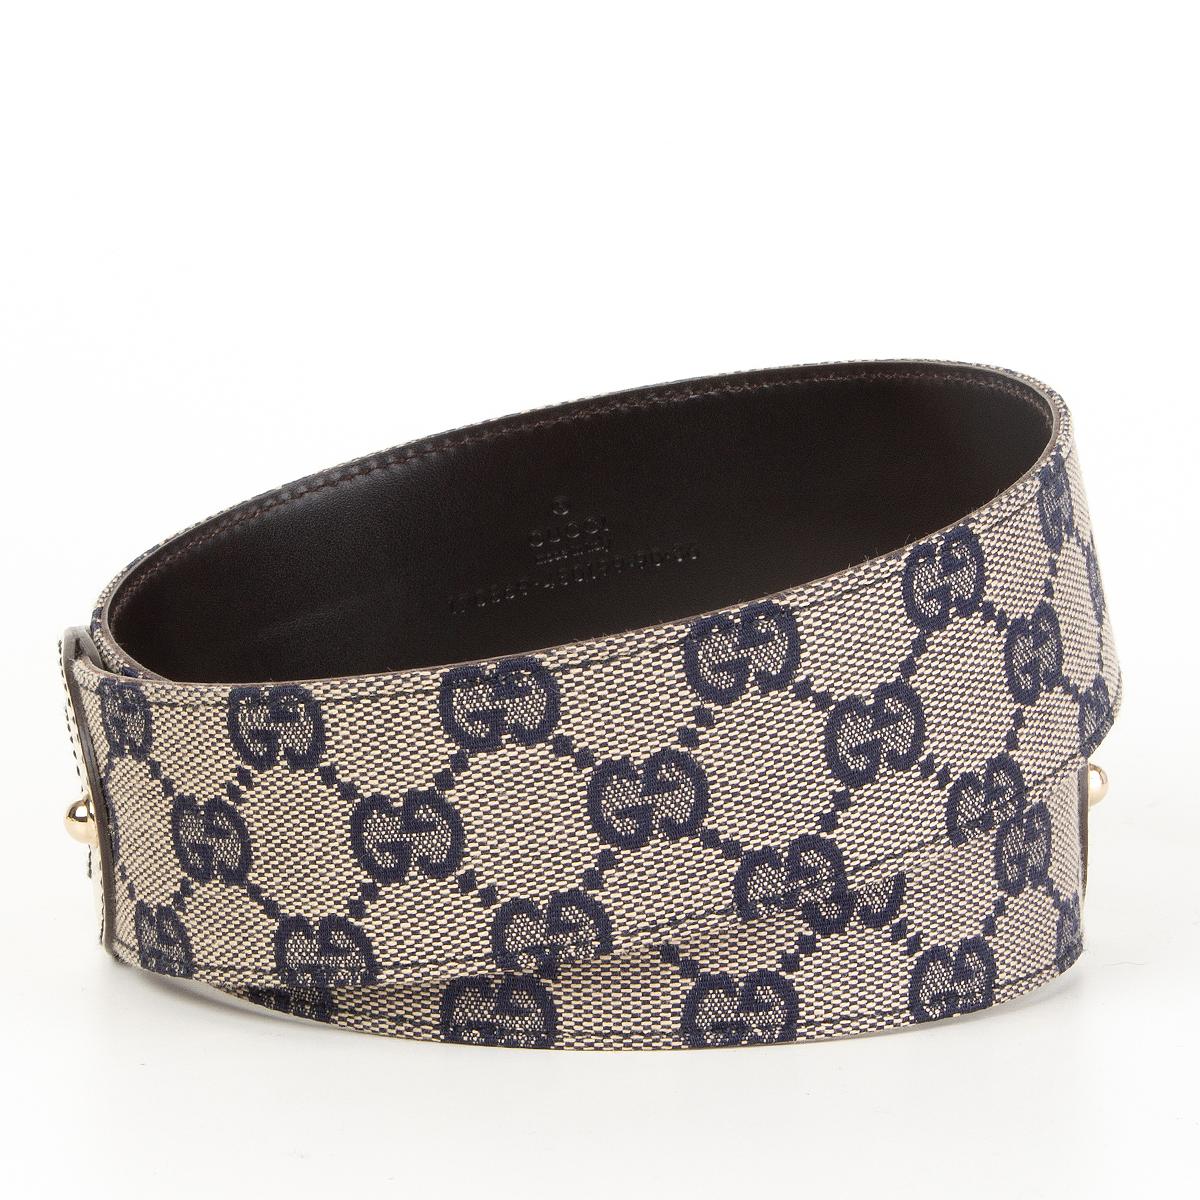 Gucci monogram belt in navy and off-white canvas with off-white leather trim and light gold-tone buckle. Has been worn and is in excellent condition. 

Tag Size 90
Width 4cm (1.6in)
Fits 84cm (32.8in) to 89cm (34.7in)
Length 96cm (37.4in)
Buckle